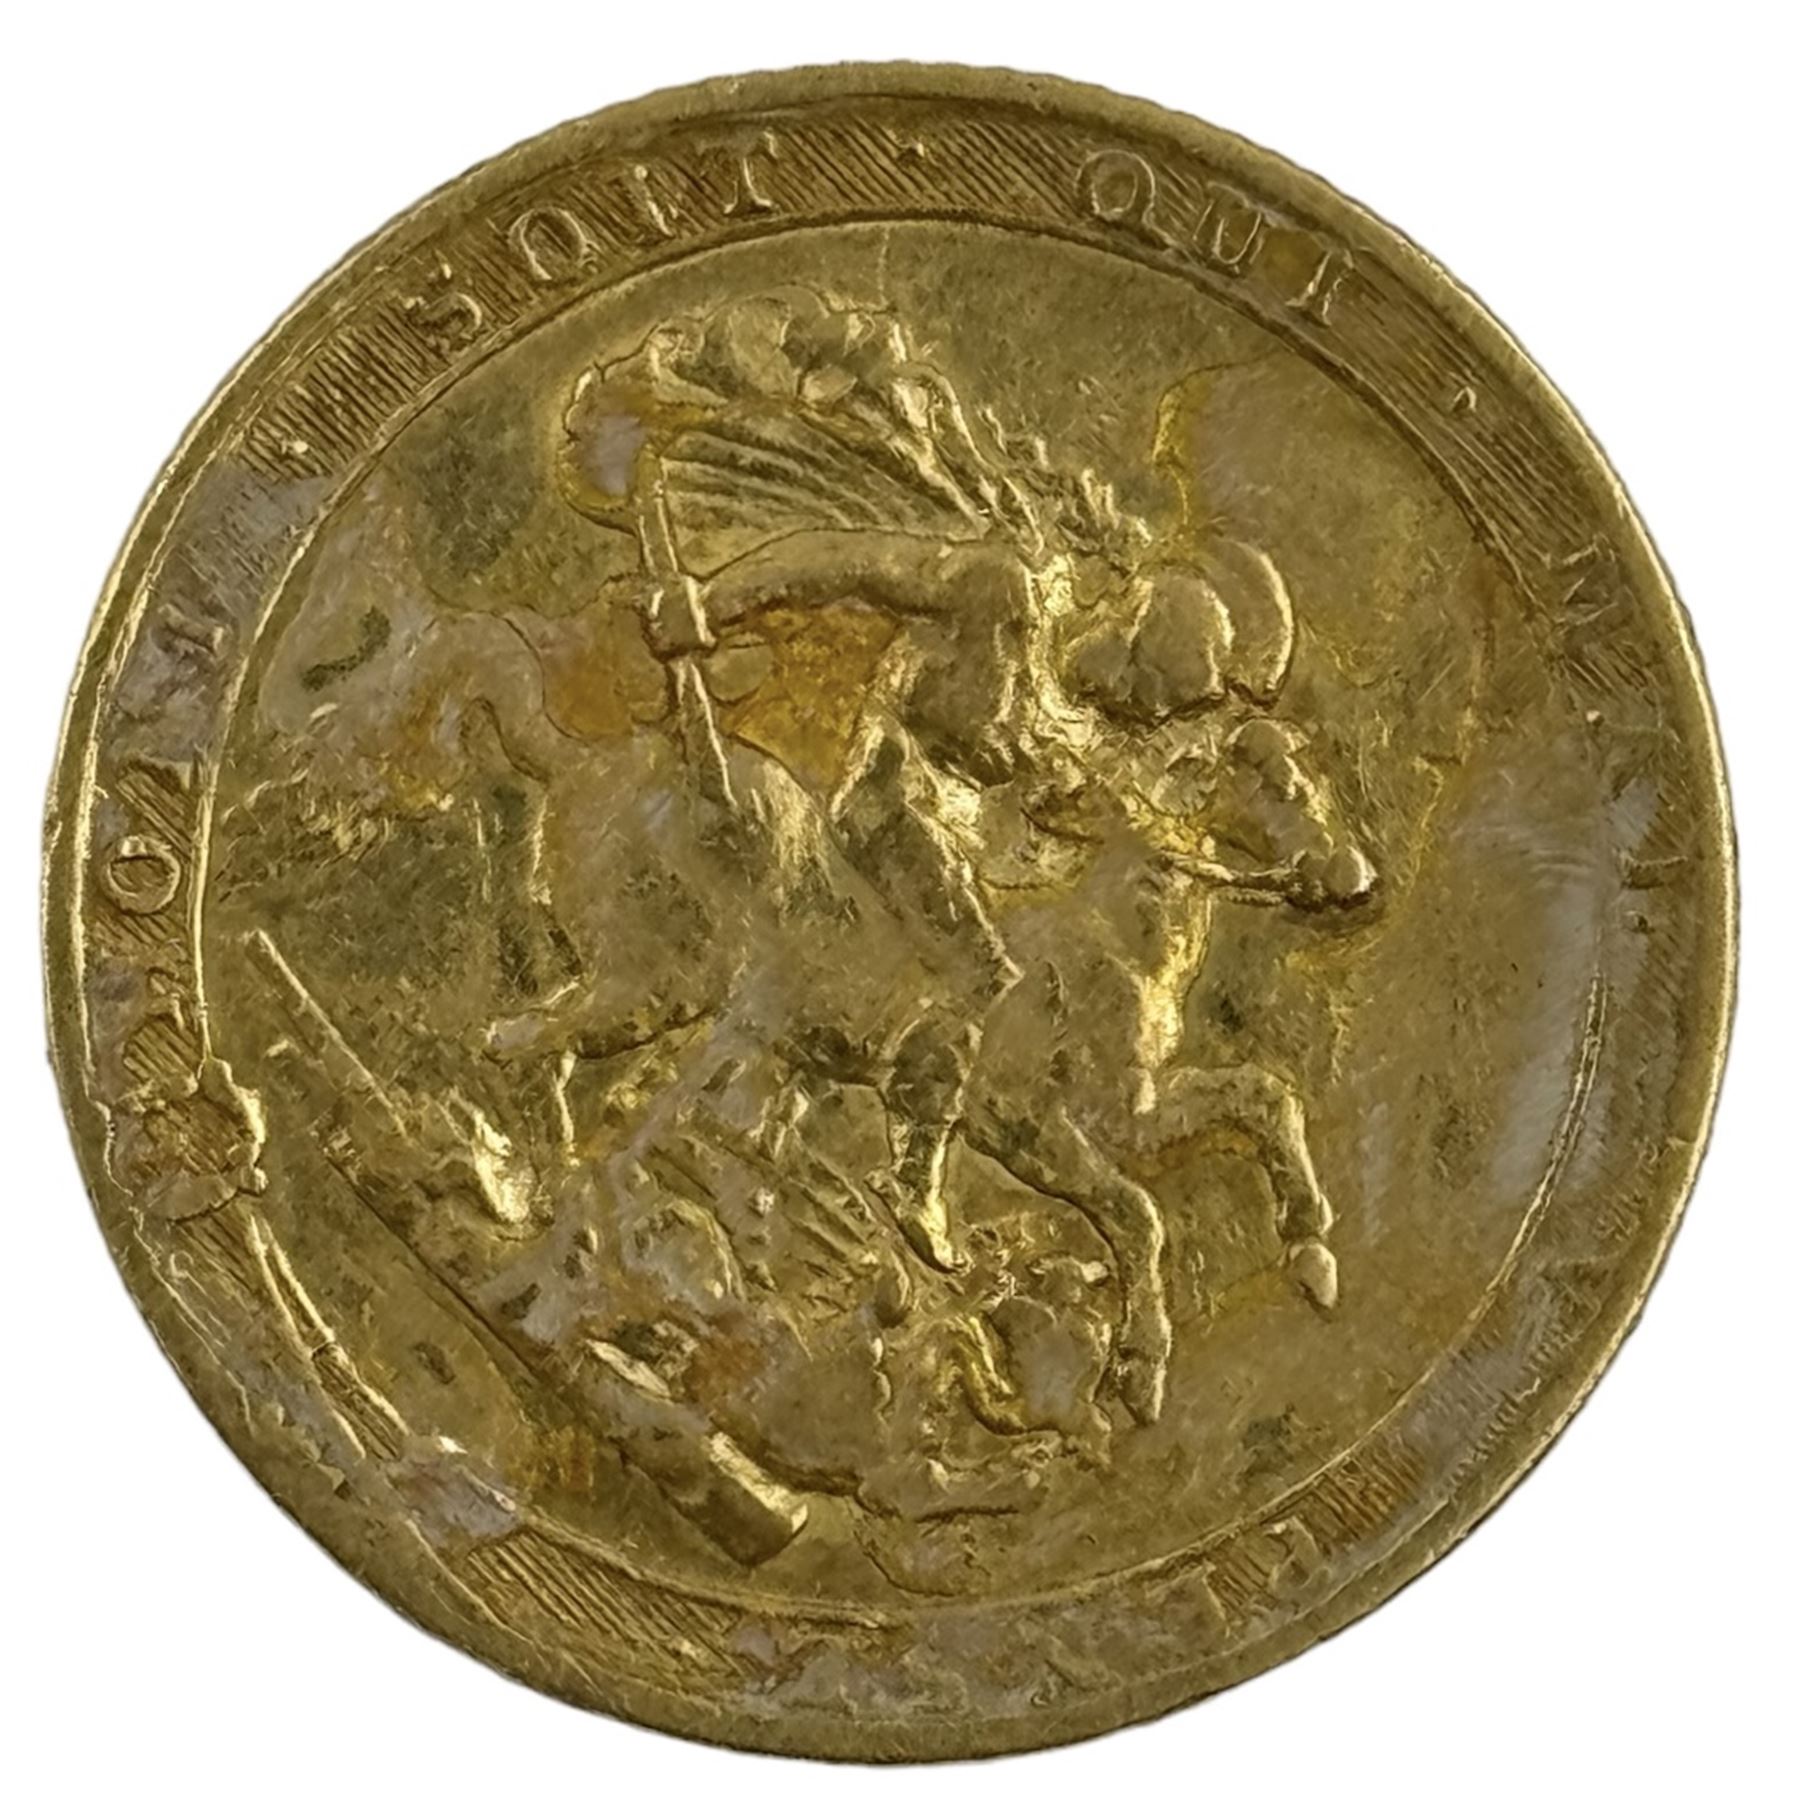 George III 1820 gold full sovereign coin - Image 2 of 2